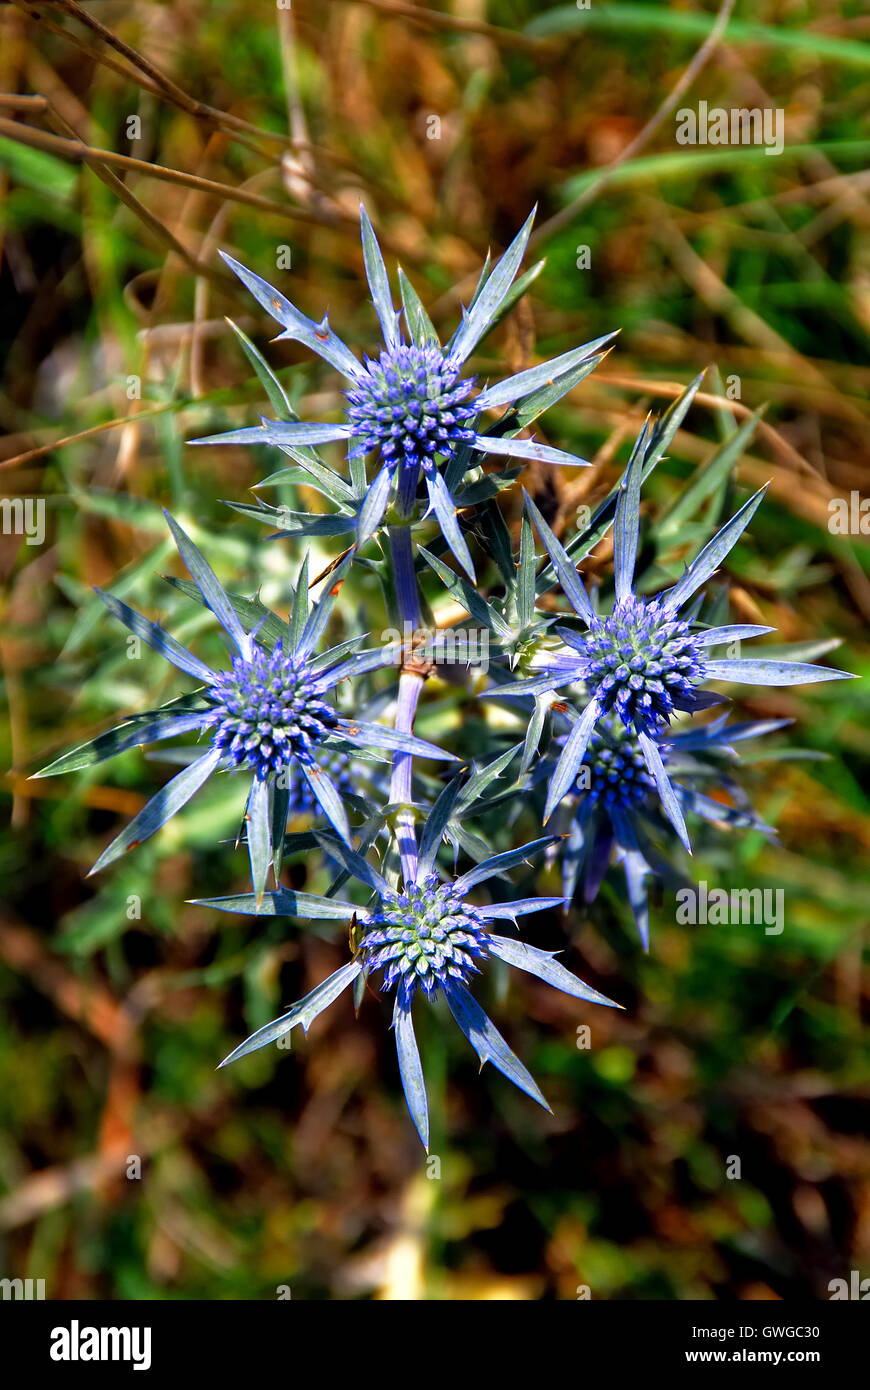 Asiago plateau, Italy. Eryngium amethystinum, the amethyst eryngo, or amethyst sea holly, is a clump-forming, perennial, tap-rooted herb. Its stem is 30 to 50 cm long and is light blue to purple in colour. It has a basal circle of obovate, pinnate, spiny, leathery, mid-green leaves. It flowers in mid to late summer with cylindrical umbels, 2-3 cm long atop silvery blue bracts and branching stems. The plant is native to the eastern Mediterranean and prefers dry places and soils that are rich in calcium. Stock Photo